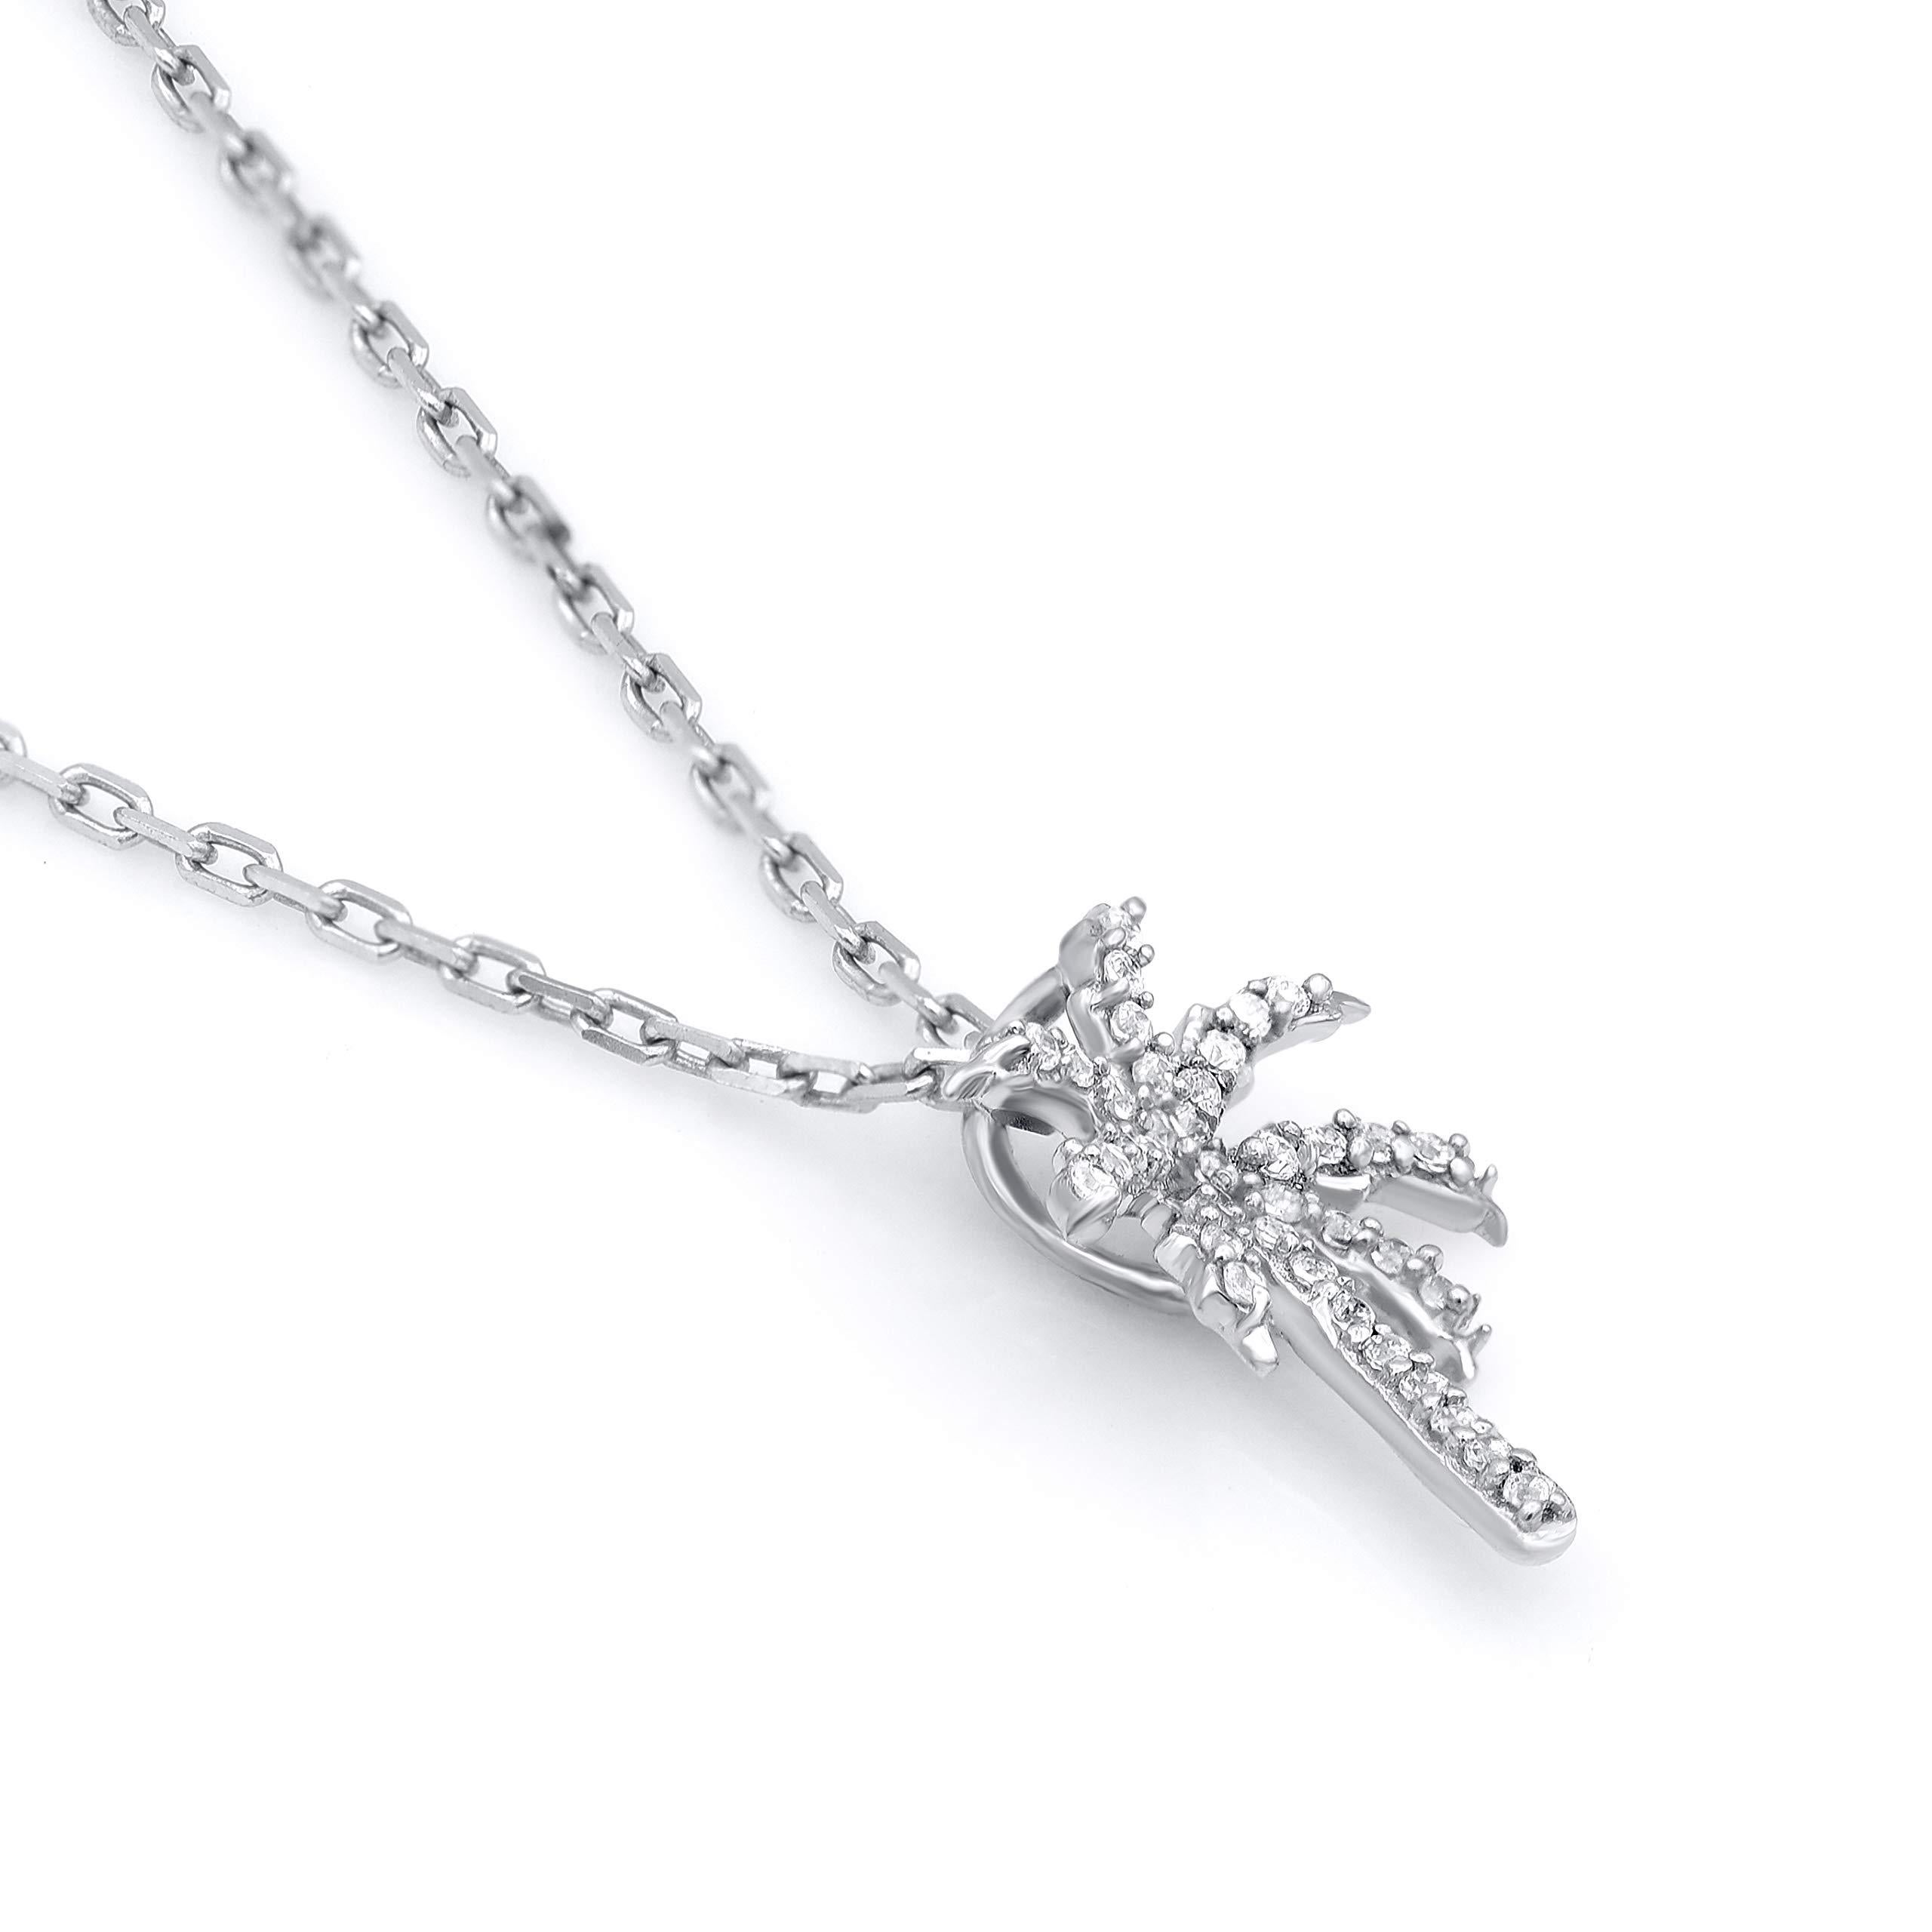 You can almost feel the tropical breeze when you wear this diamond palm tree pendant. This pendant is crafted from 14-karat white gold and features 38 single cut diamonds set in prong setting. H-I color I2 clarity and a high polish finish complete